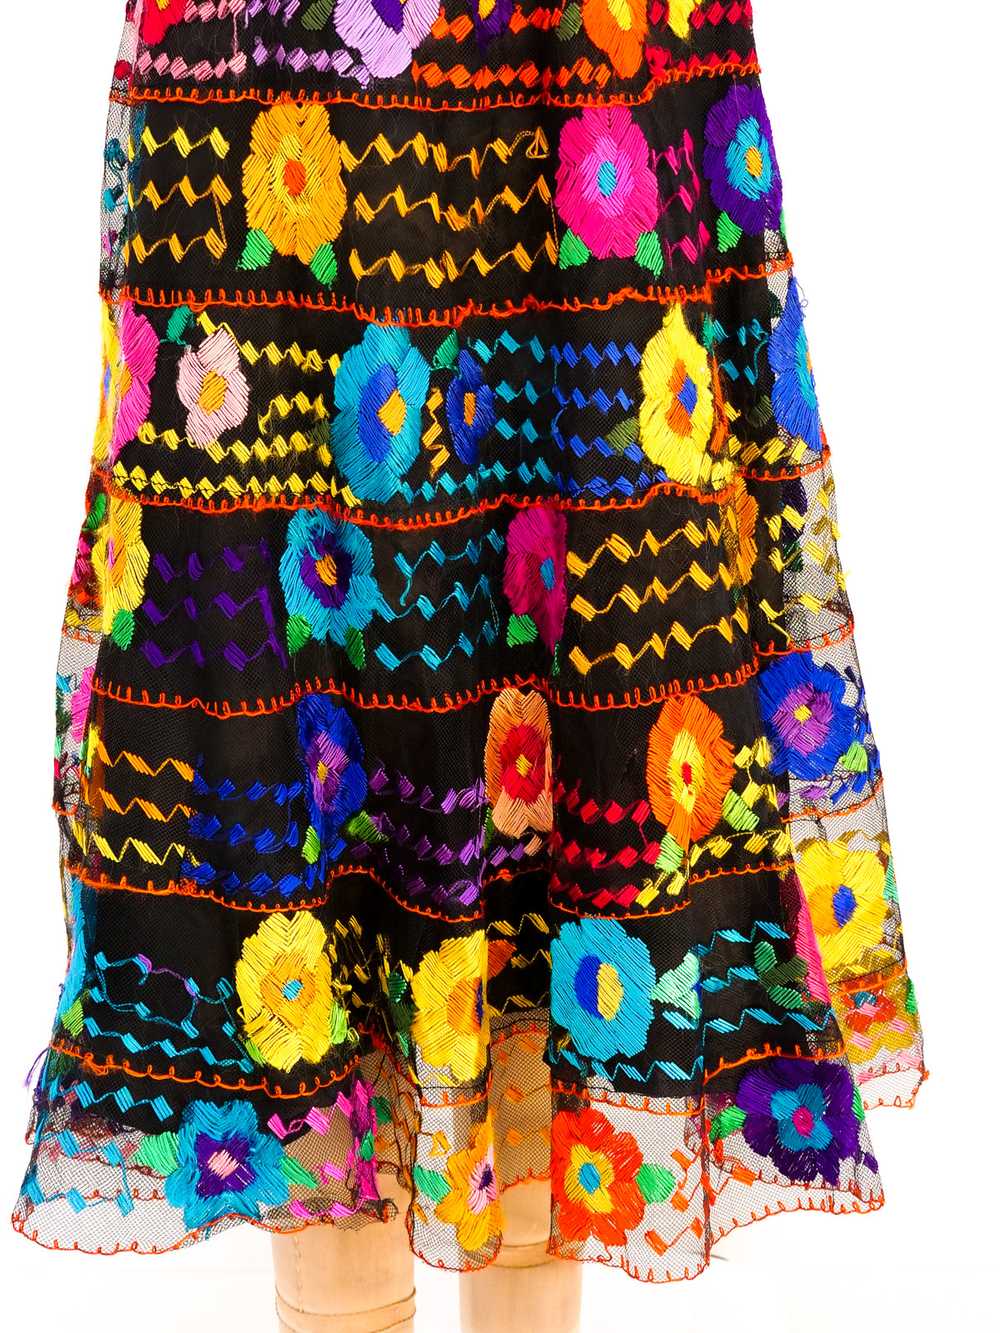 Floral Embroidered Mexican Midi Skirt - image 4